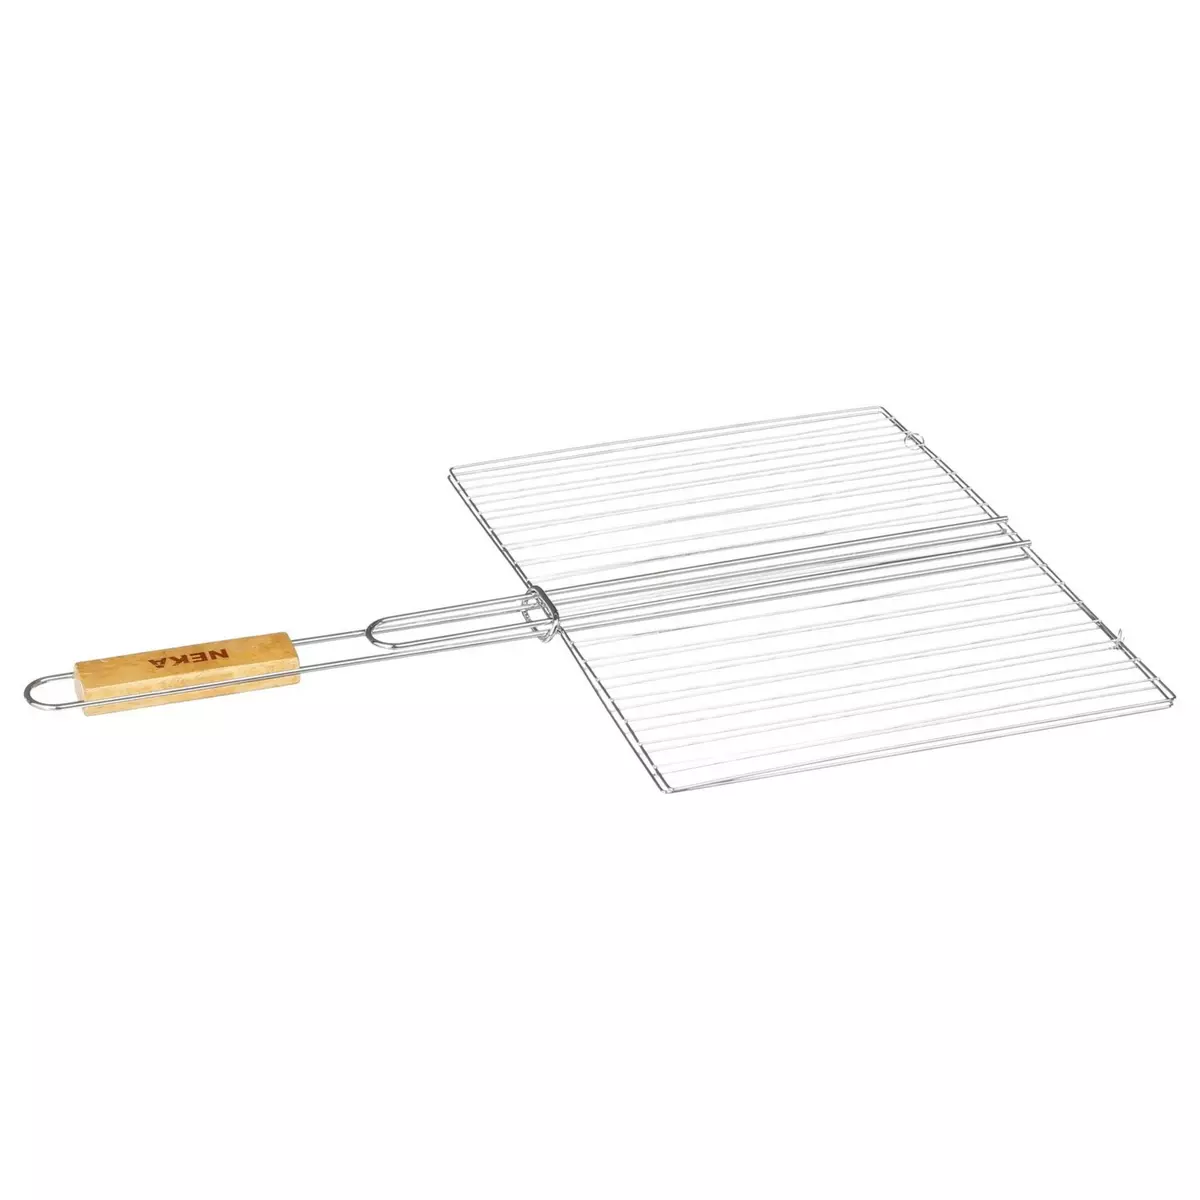 NEKA Grille barbecue Rectangulaire - 30 x 40 cm.